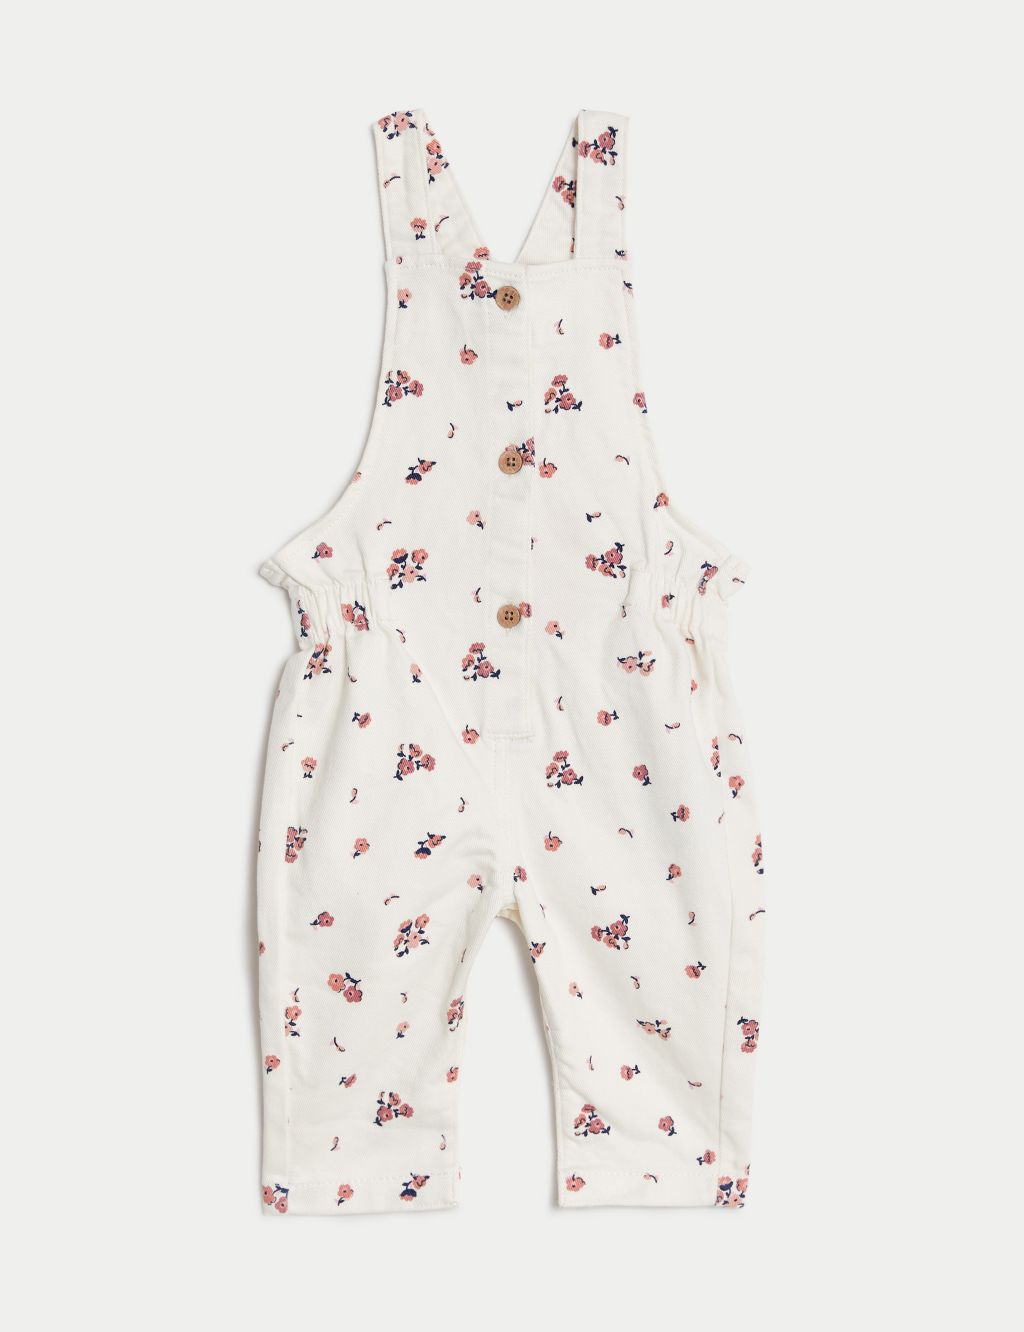 Page 7 - Baby Clothes | Baby & Toddler Clothes | M&S